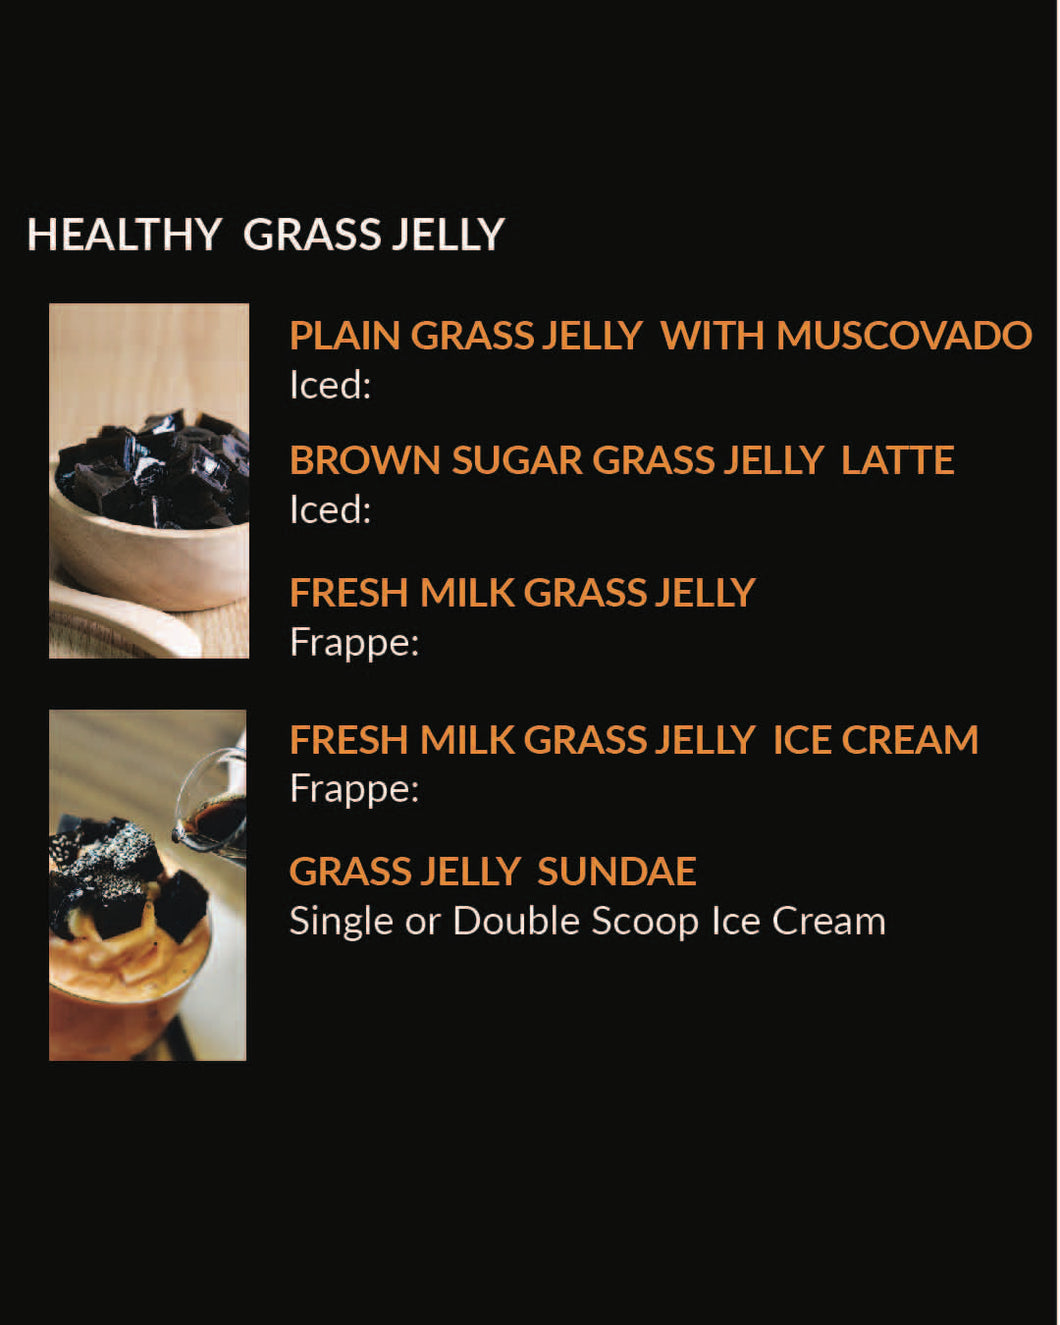 Healthy Grass Jelly (MENU ITEM NOT FOR SALE)